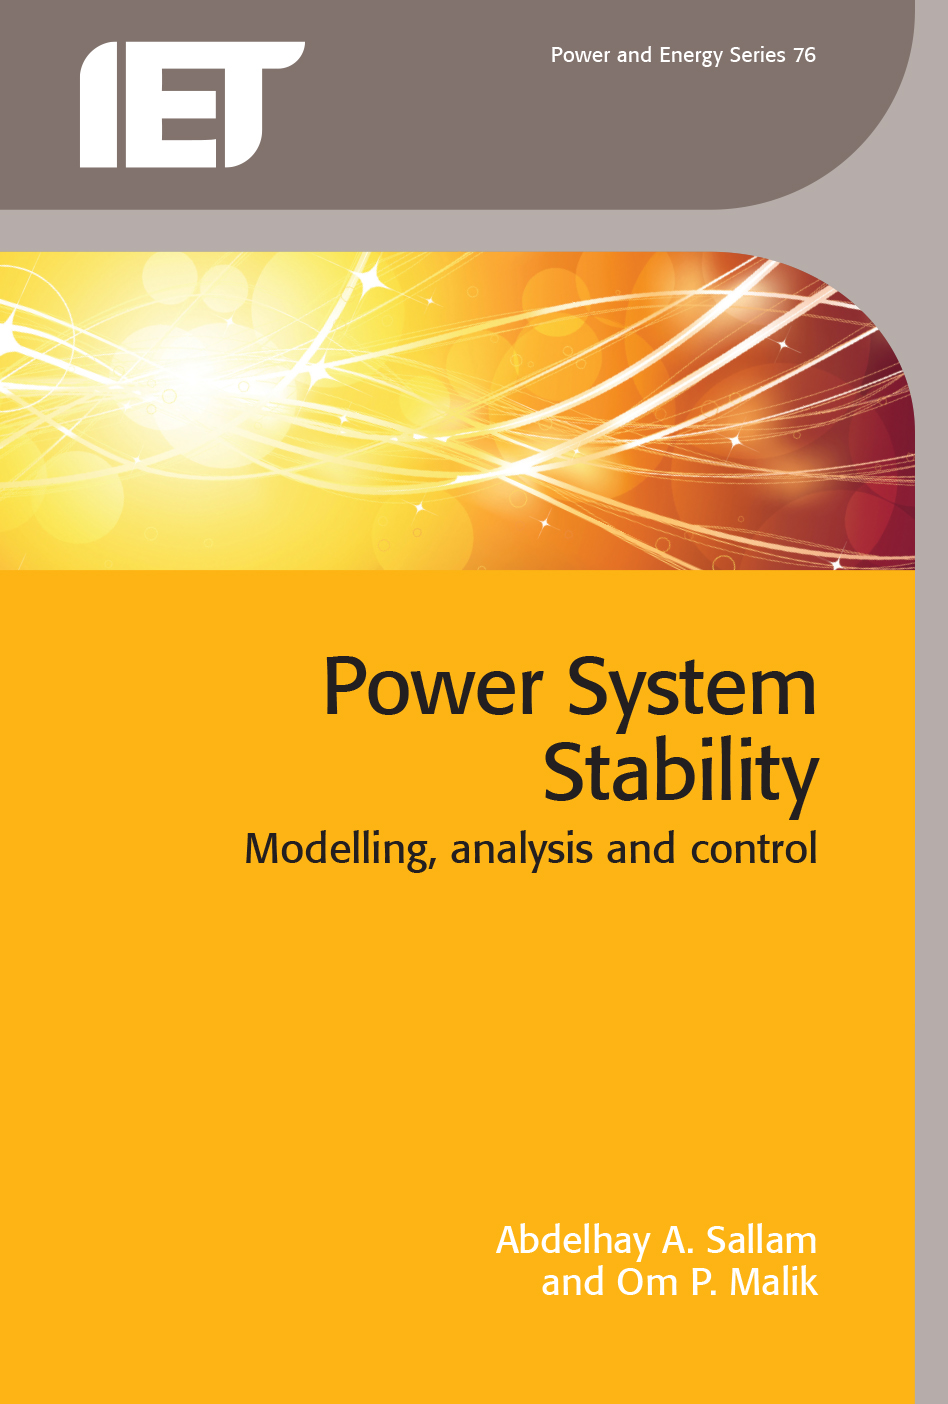 Power System Stability, Modelling, analysis and control